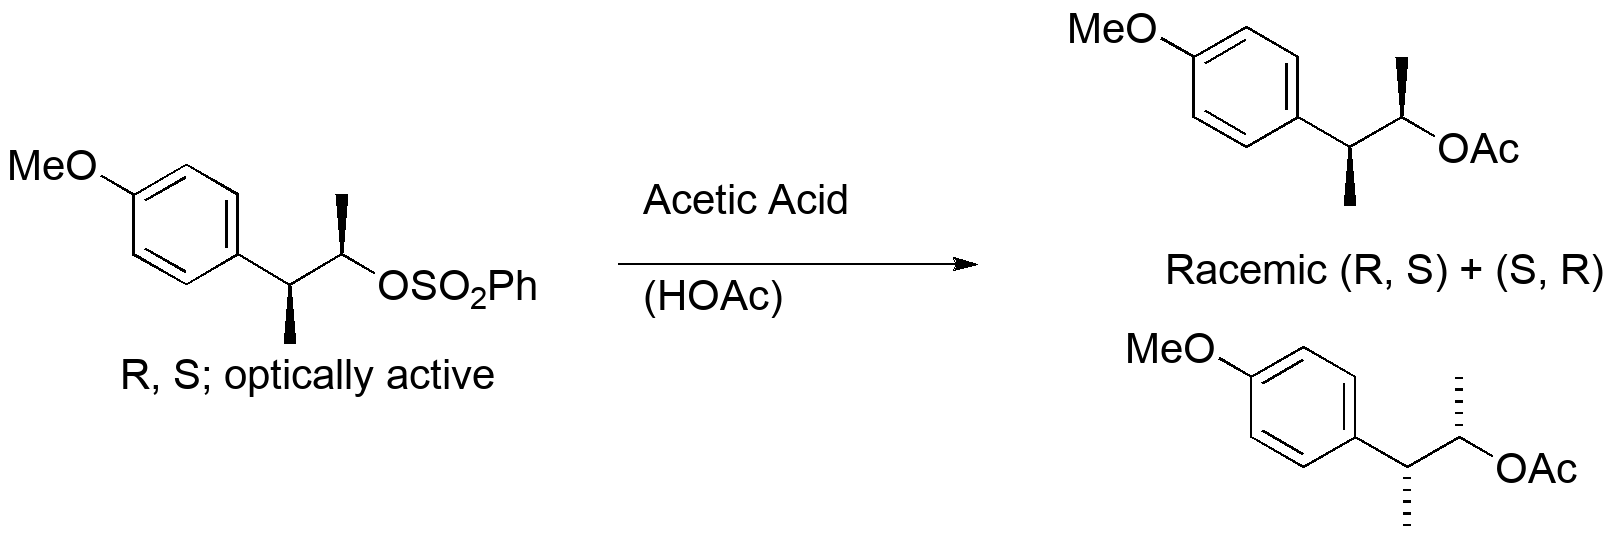 A 2-phenethyl benzenesulfonate starts out optically active (R, S configuration).  Substitution with acetate in acetic acid results in apparent retention of configuration, but racemic product.